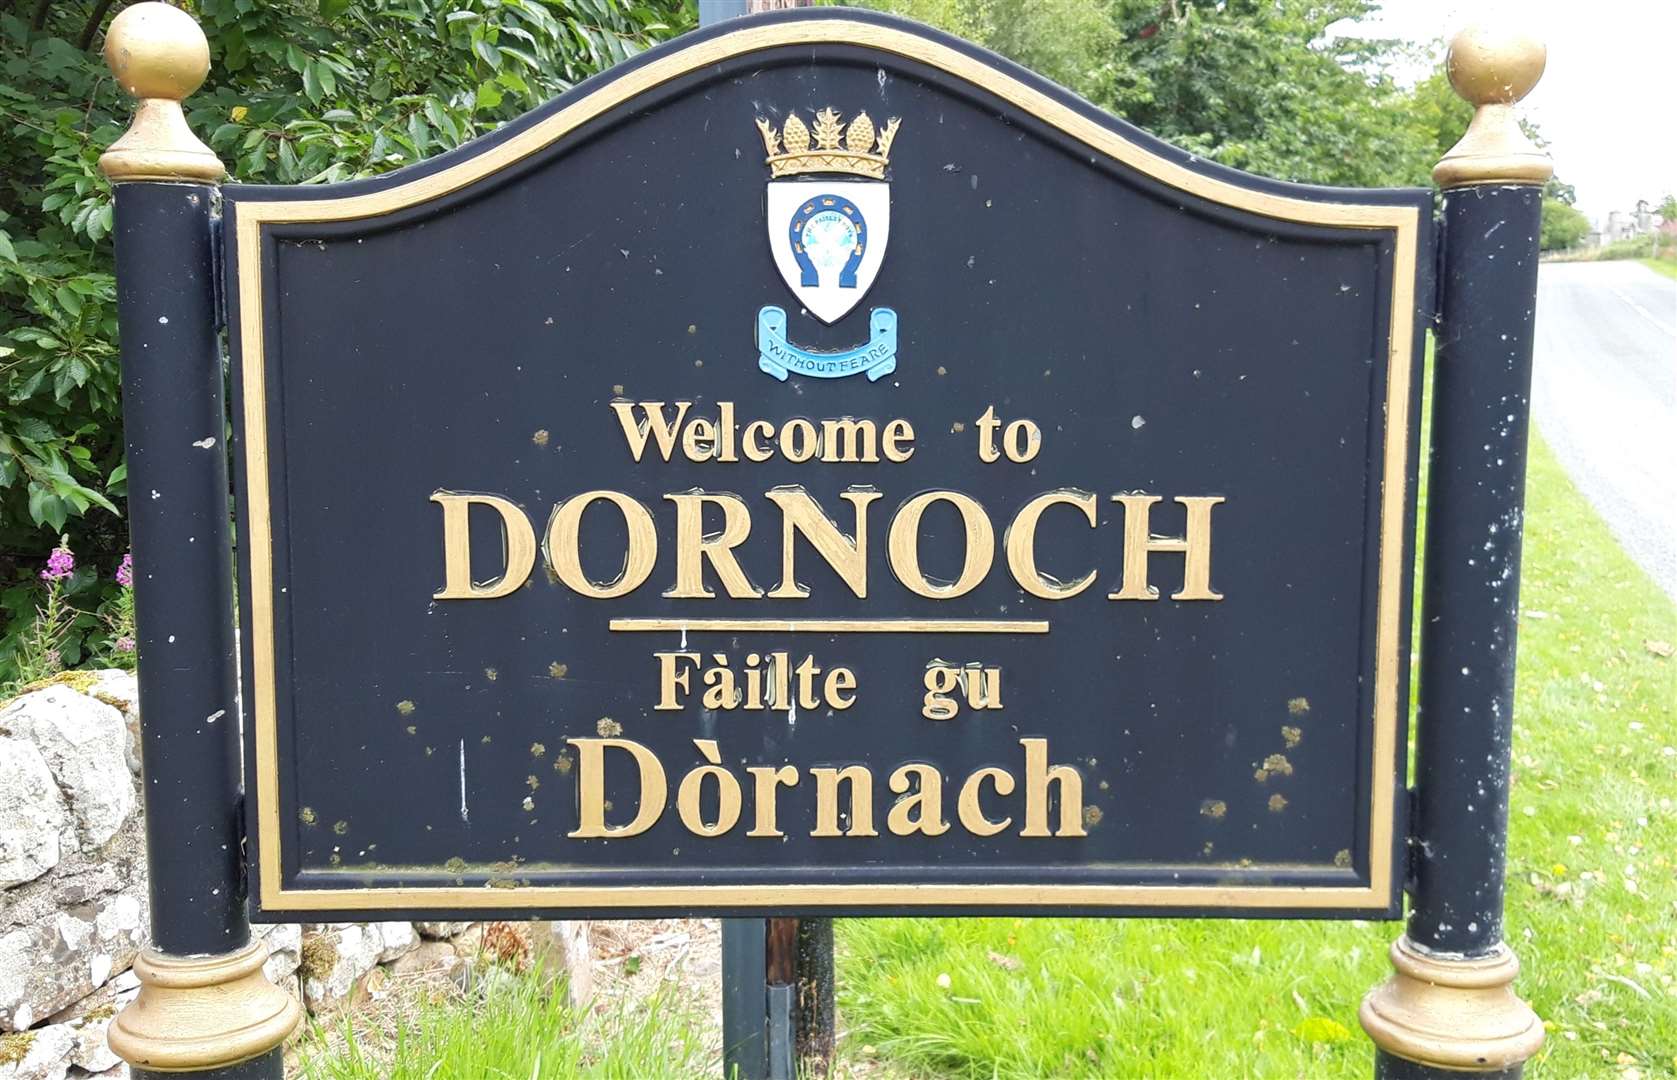 It is hoped there will be less congestion in Dornoch now a new vehicle park has opened.